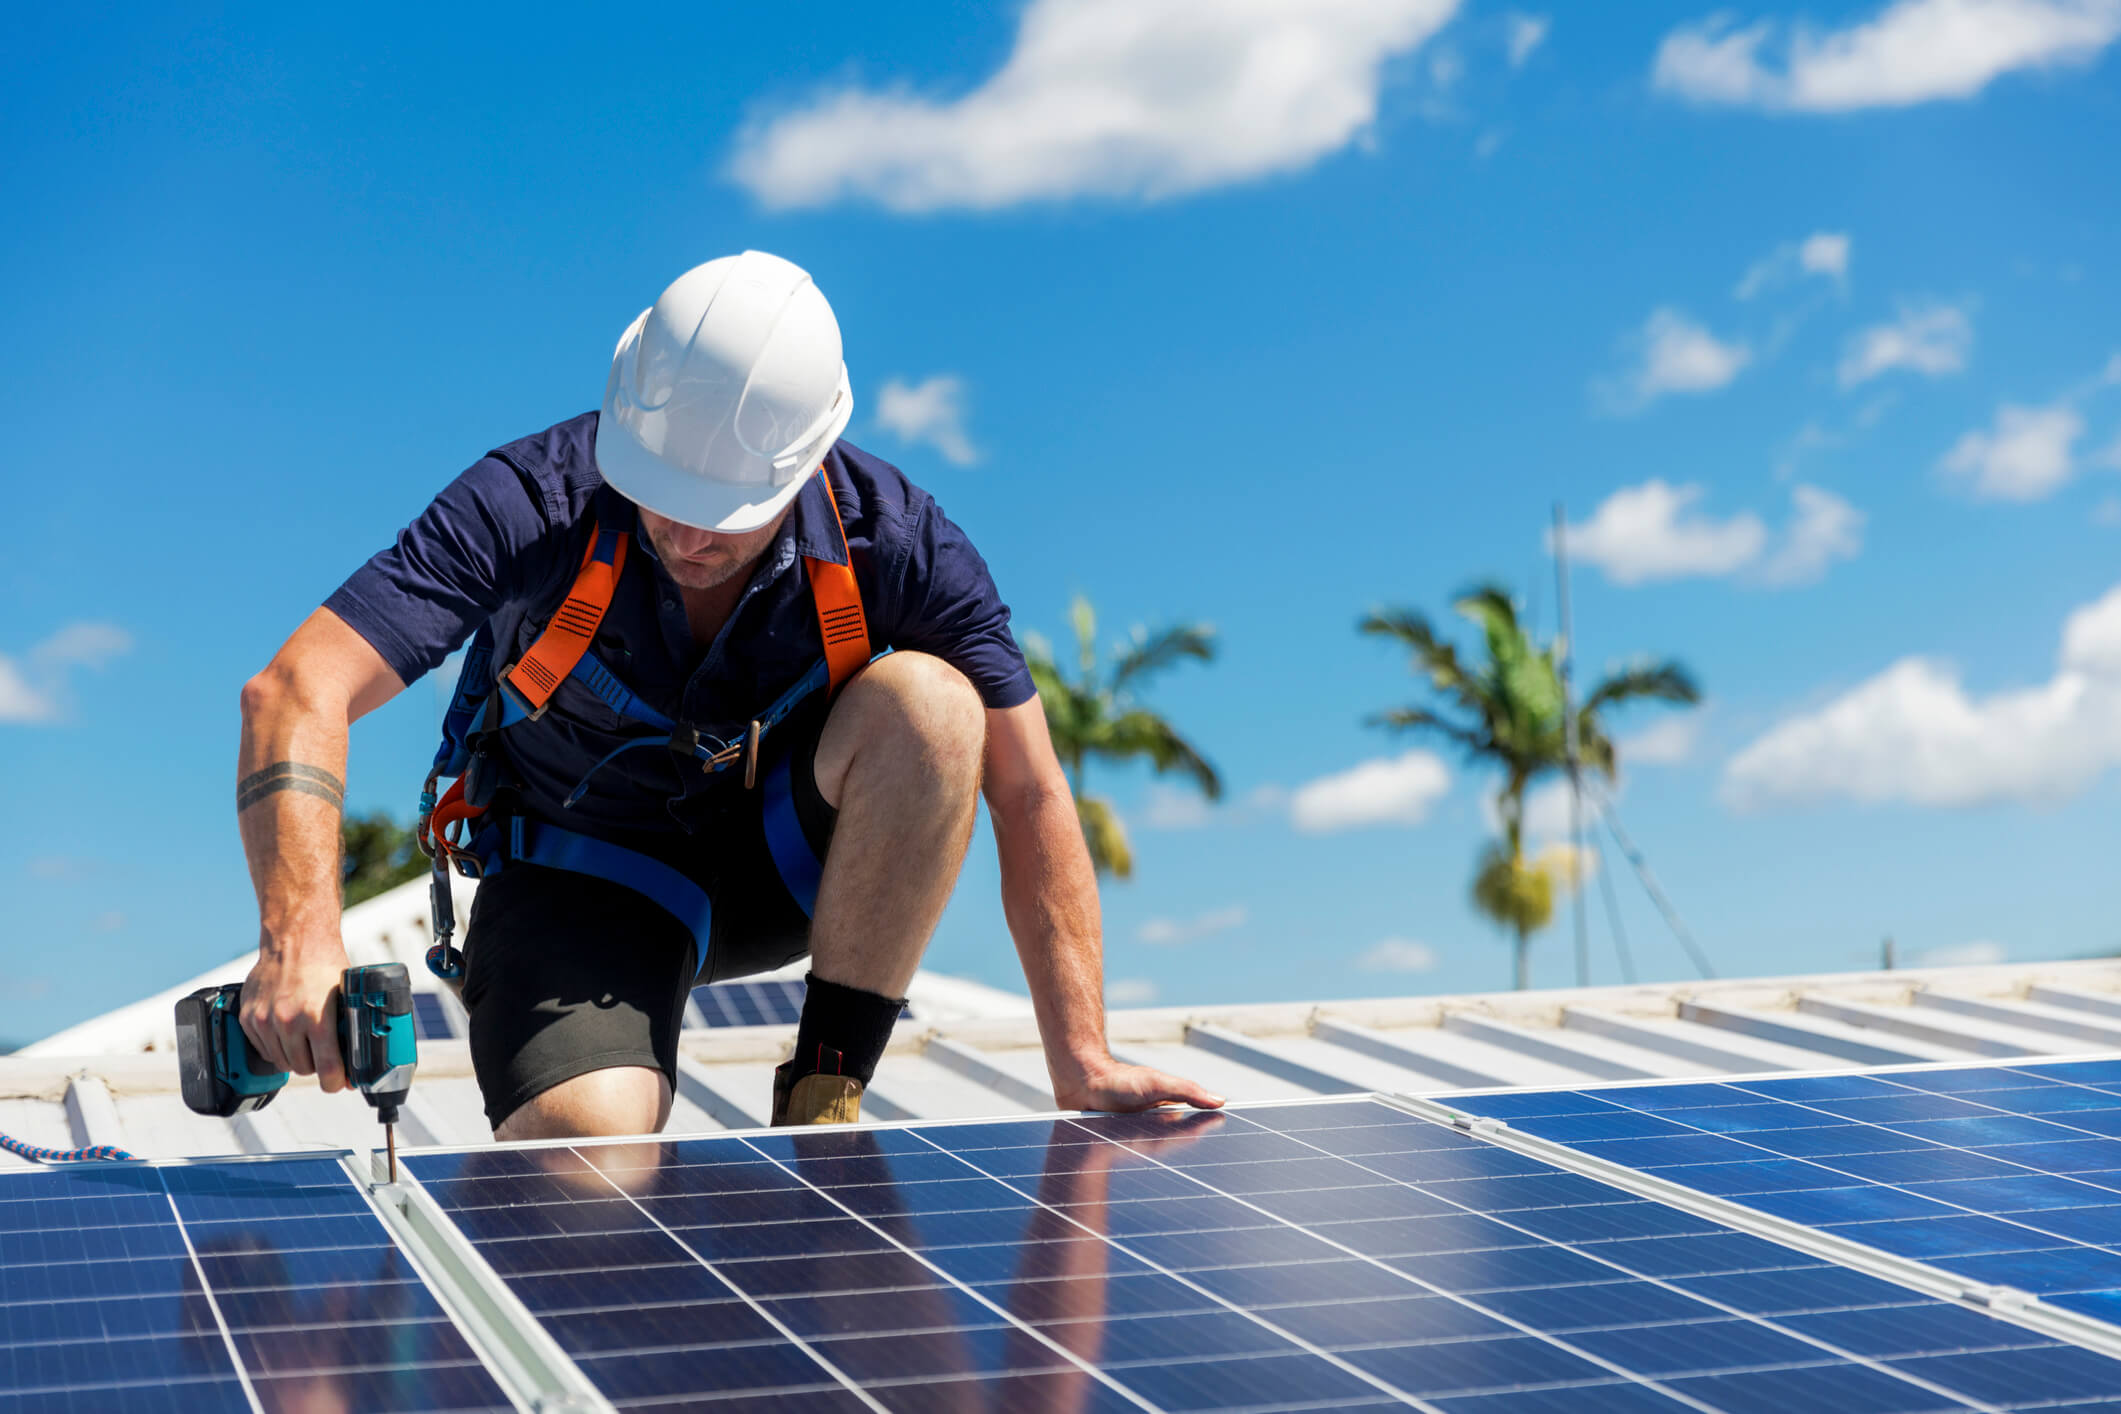 enefits of Installing A Solar Panel in Gurgaon